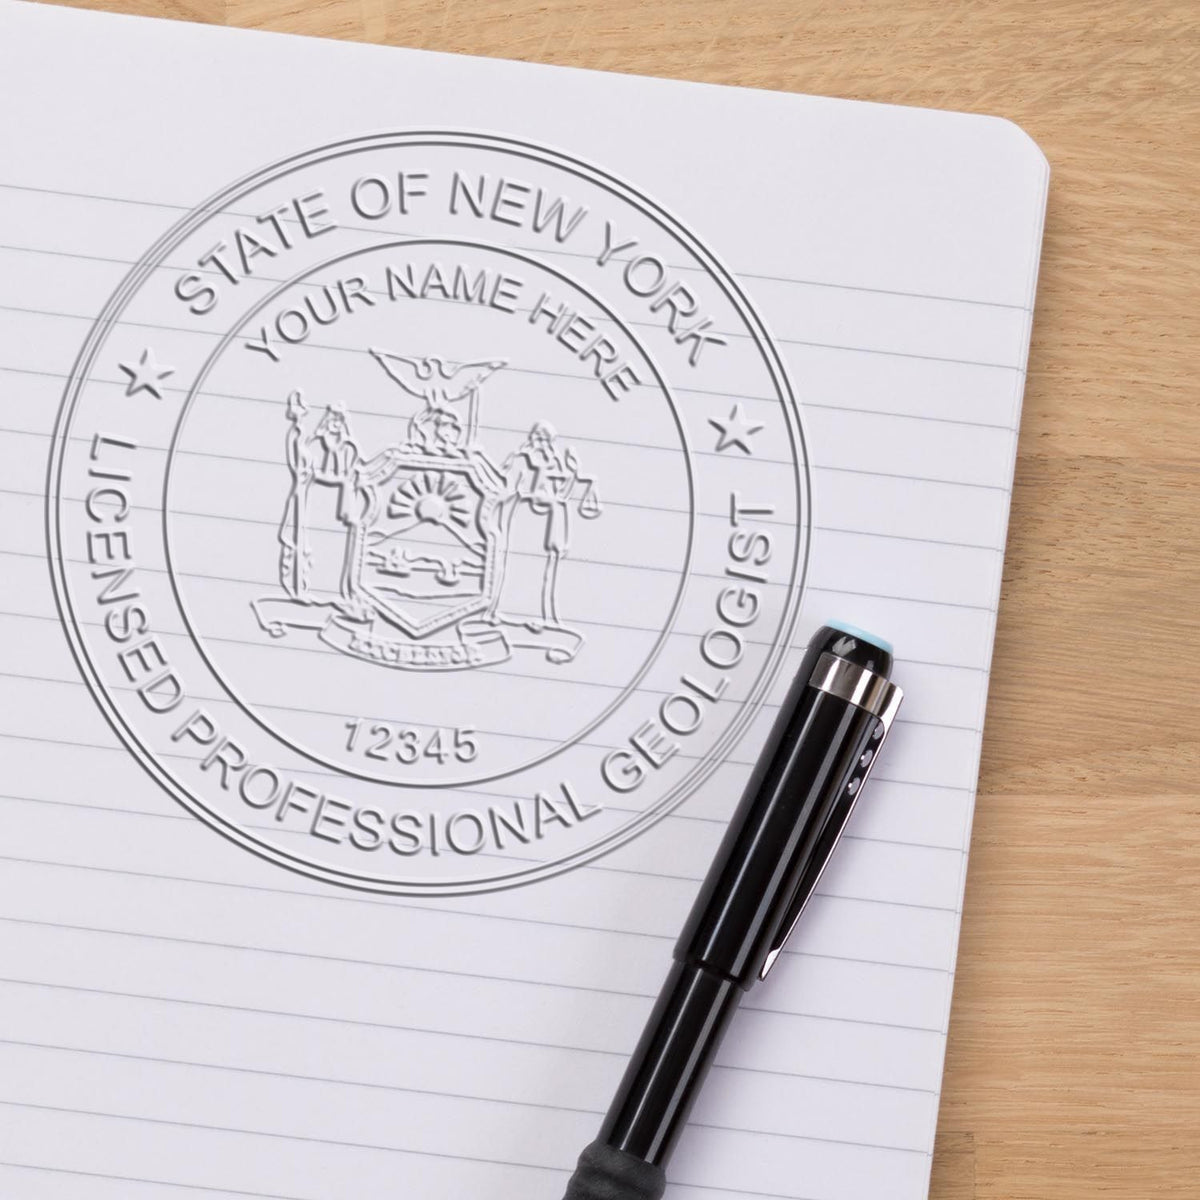 A stamped imprint of the State of New York Extended Long Reach Geologist Seal in this stylish lifestyle photo, setting the tone for a unique and personalized product.